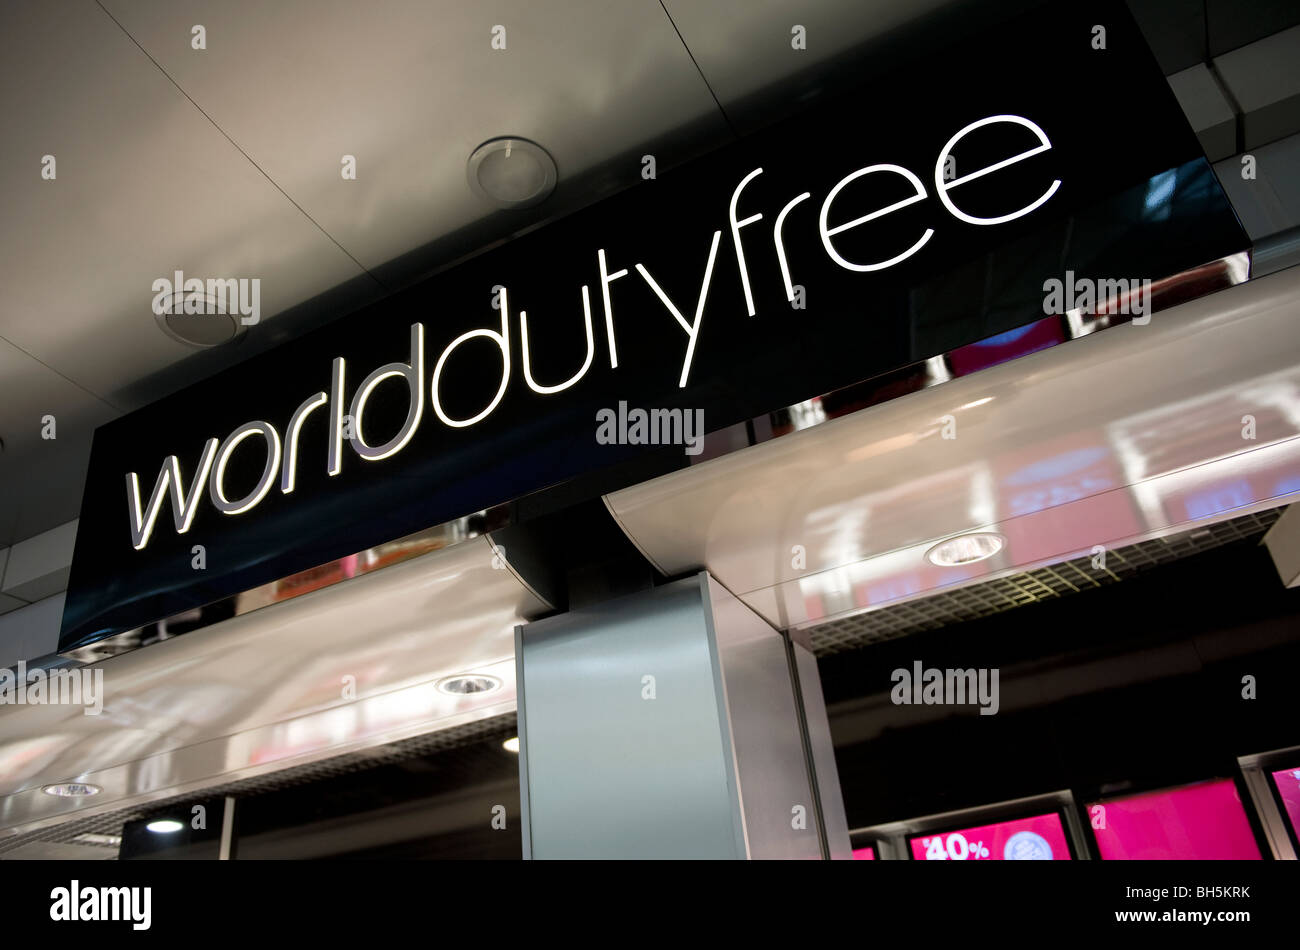 world duty free shopping sign at stansted airport, england Stock Photo